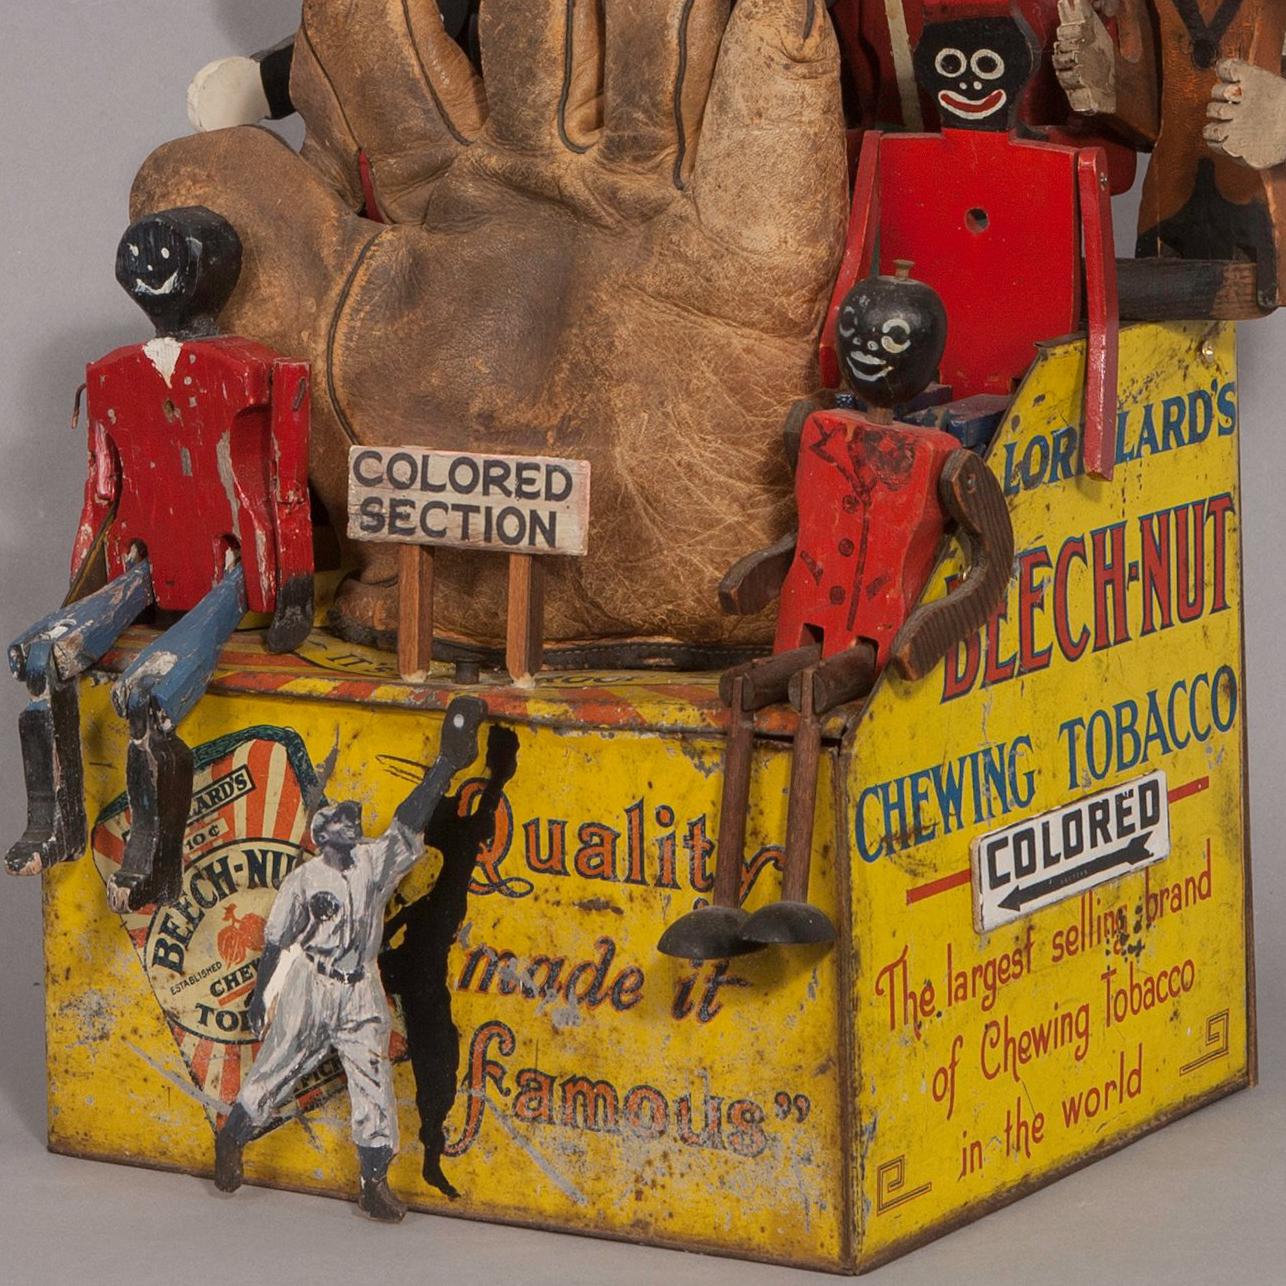 assemblage sculpture: chewing tobacco tin remade into baseball stands, 2 handmade scoreboards, old glove, carved baseball figure, old wood racist caricatures of people in the stands

This baseball imagery symbolizes a racist aspect of American